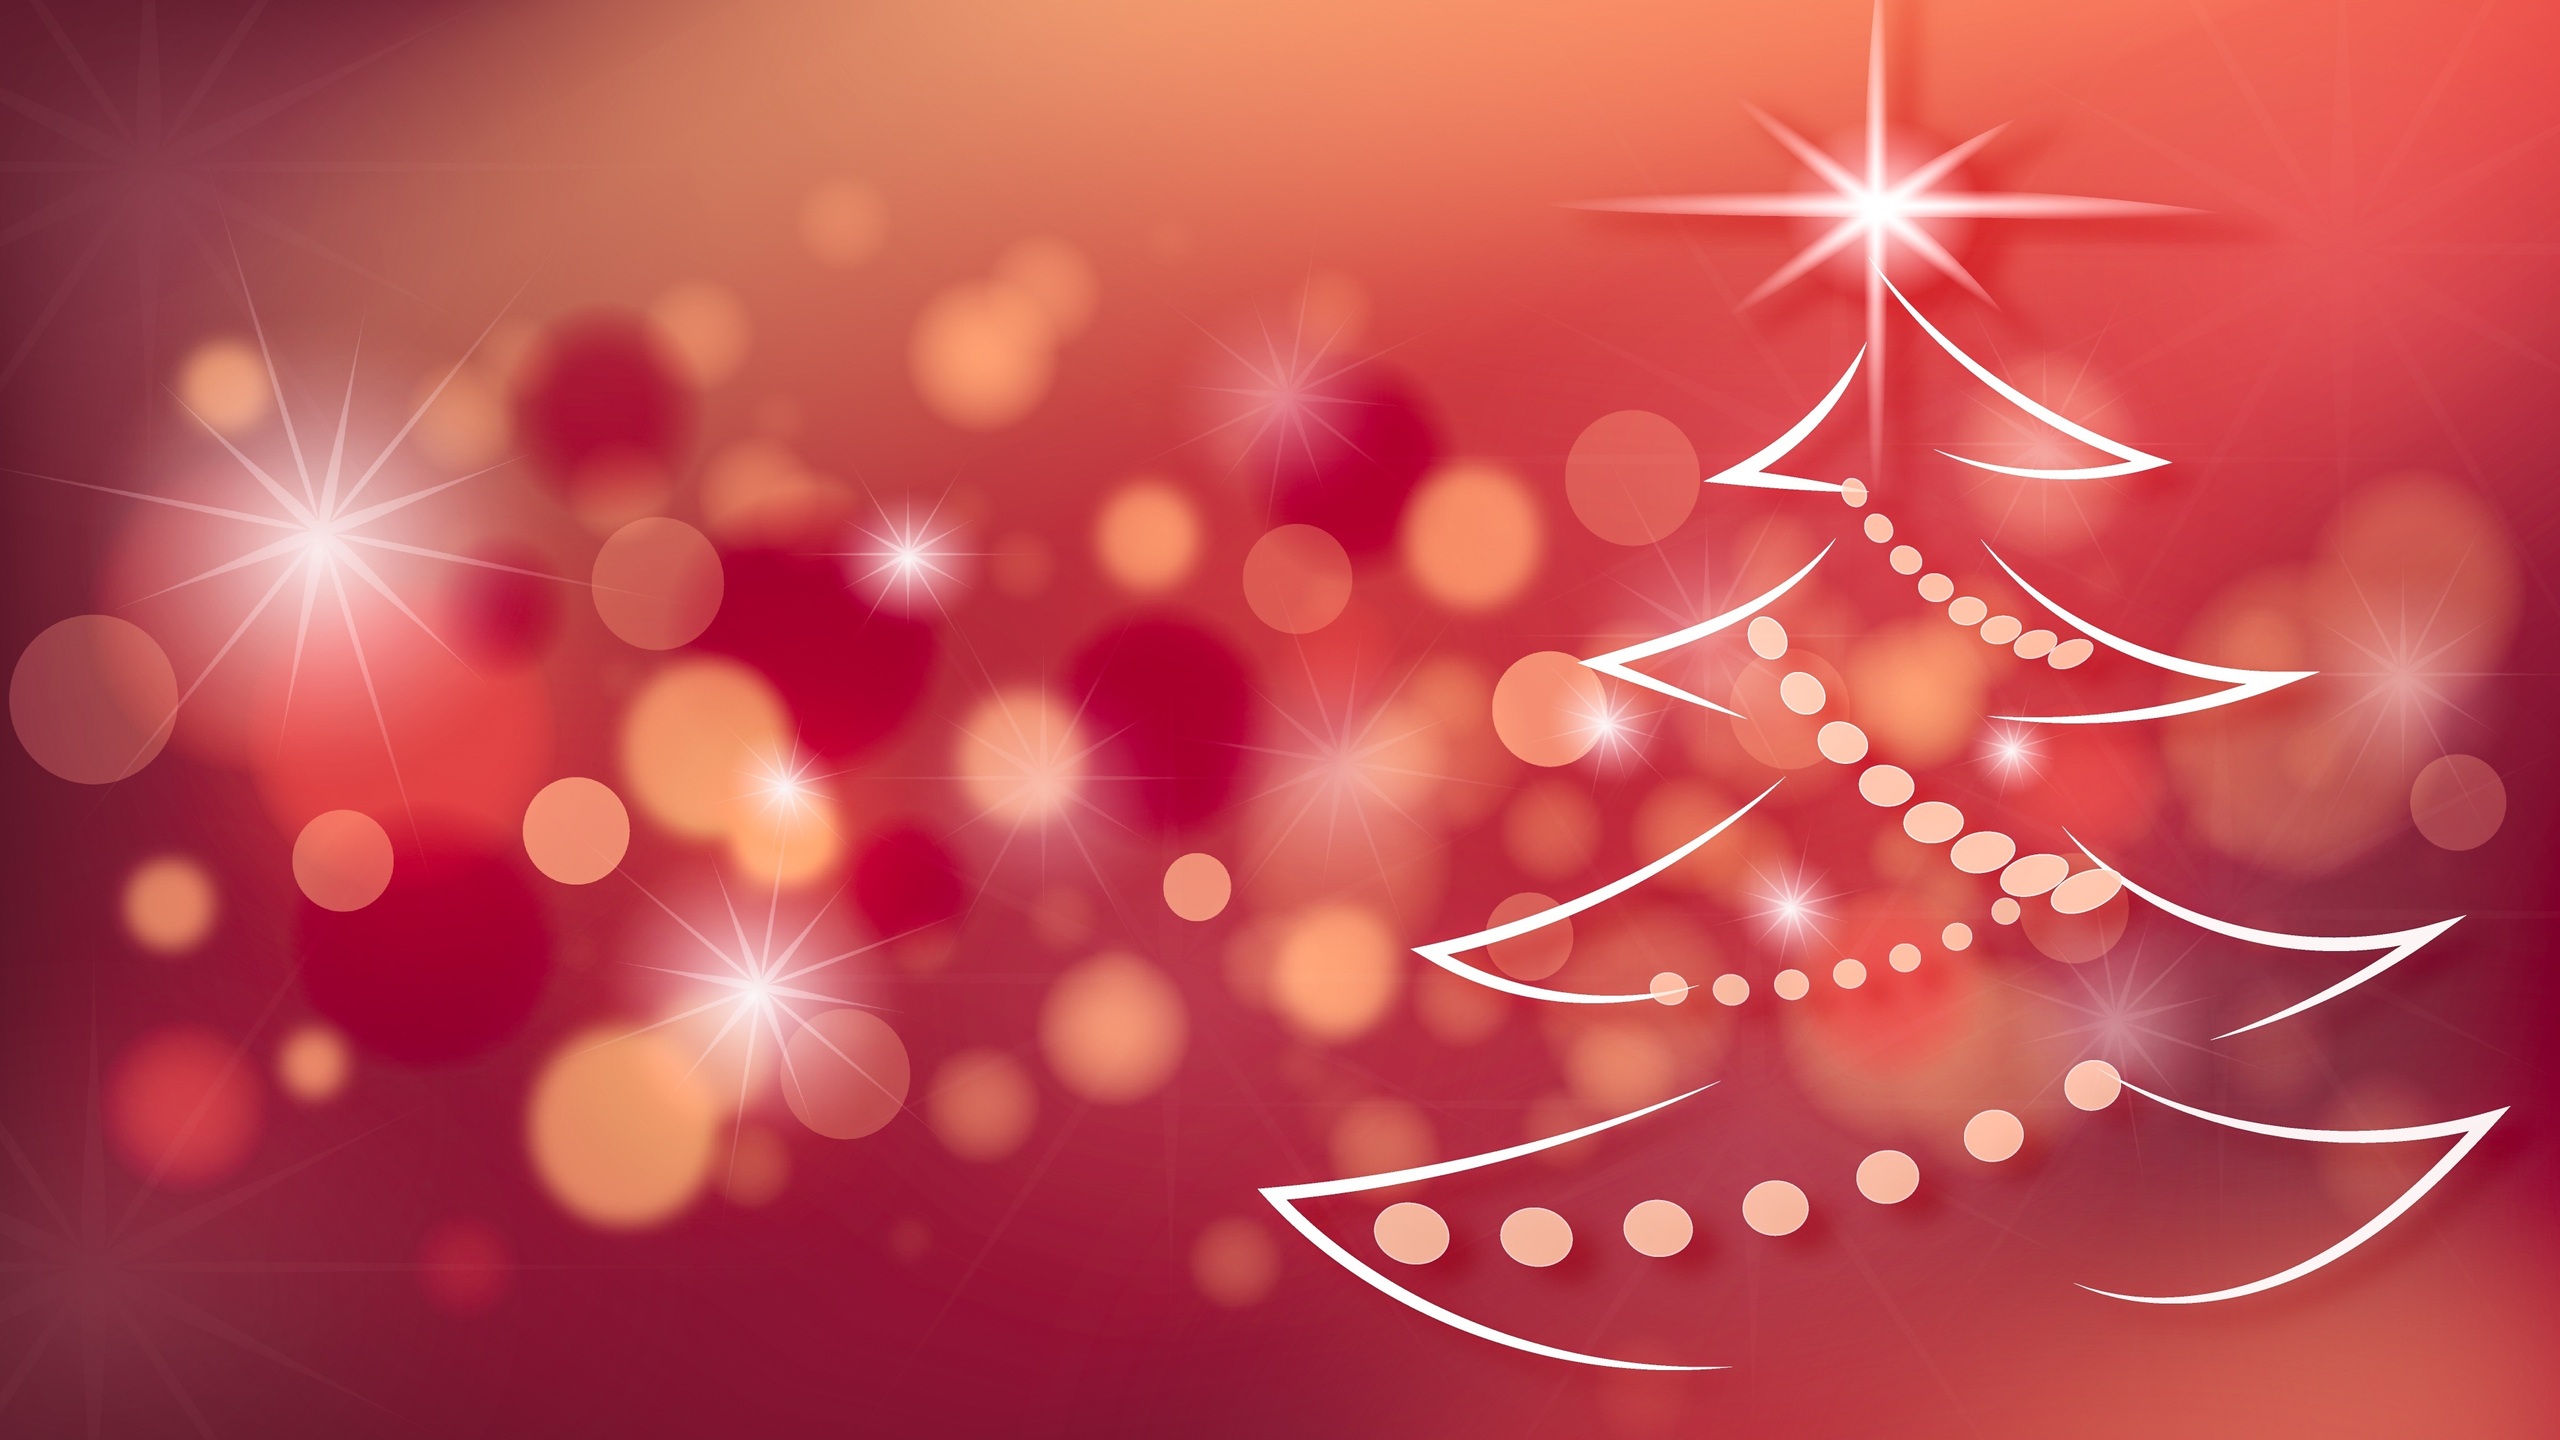 200 Christmas Background Images and Wallpapers